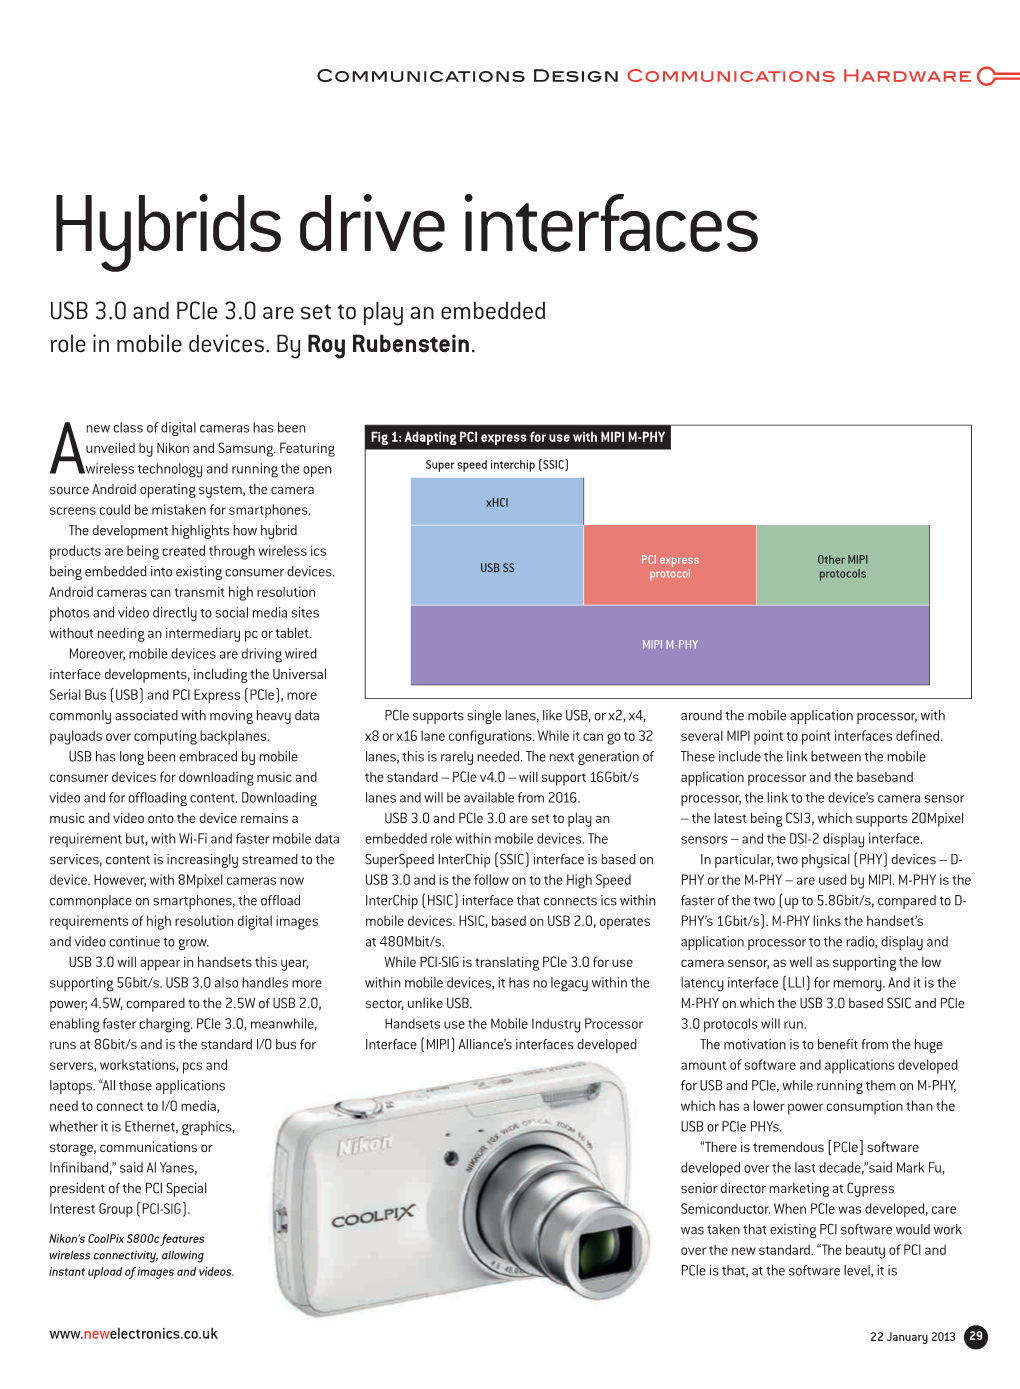 Hybrids Drive Interfaces USB 3.0 and Pcie 3.0 Are Set to Play an Embedded Role in Mobile Devices